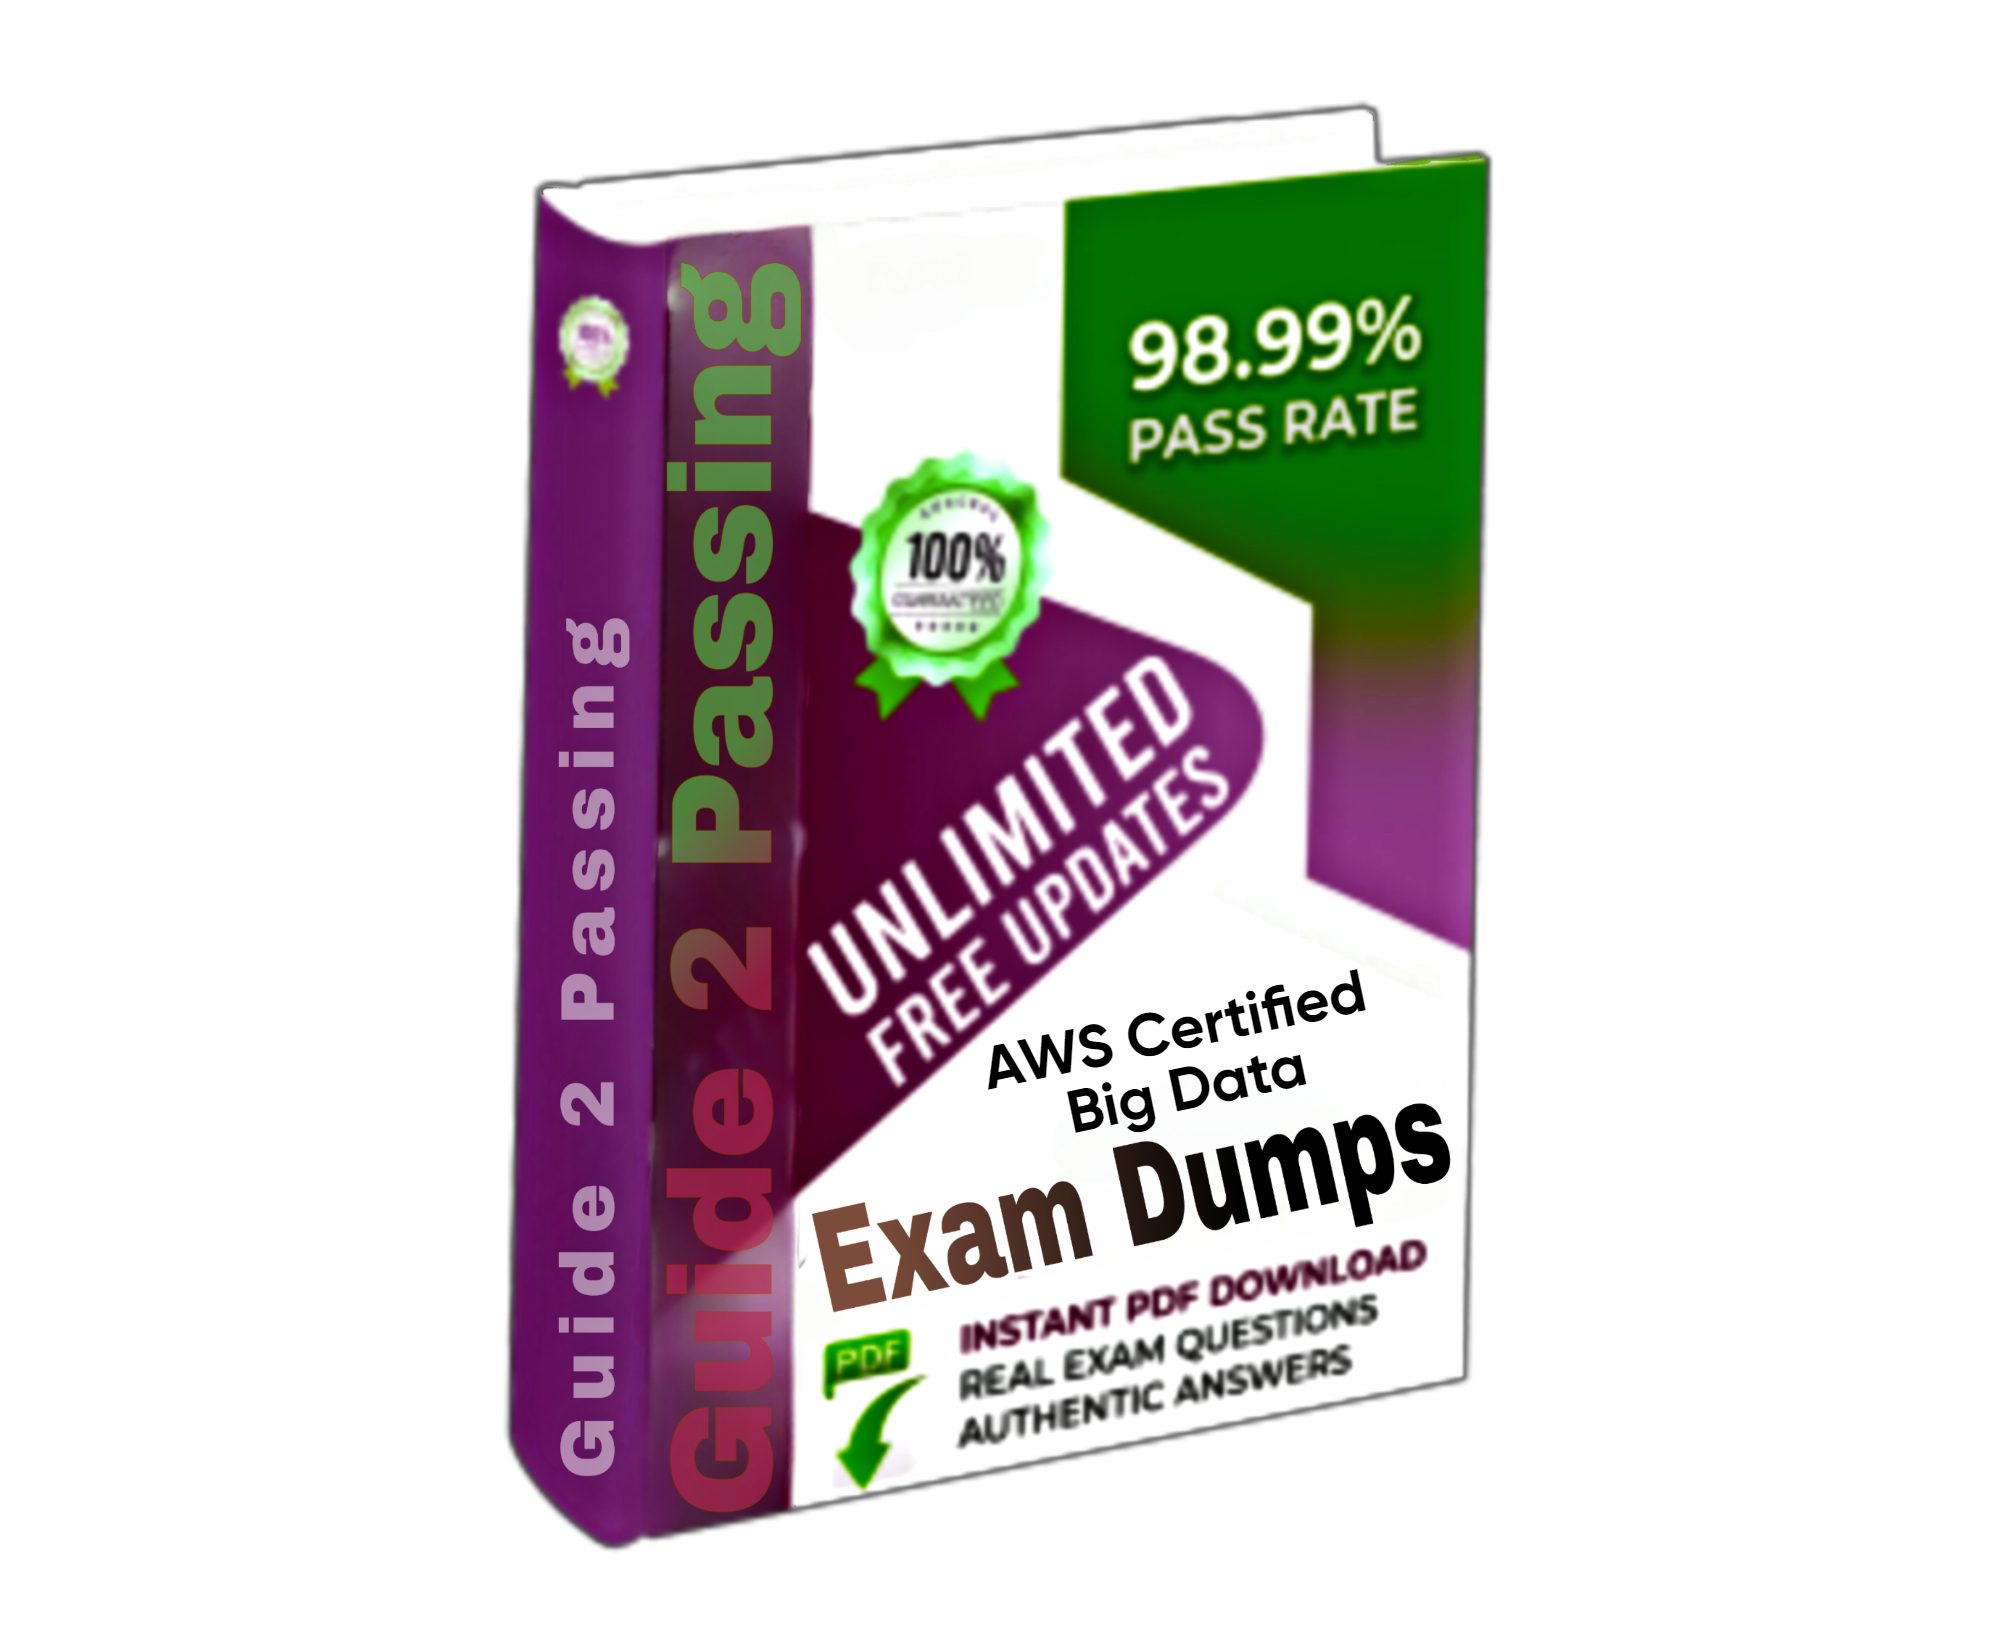 Pass Your Amazon AWS AWS Certified Big Data Exam Dumps From Guide 2 Passing